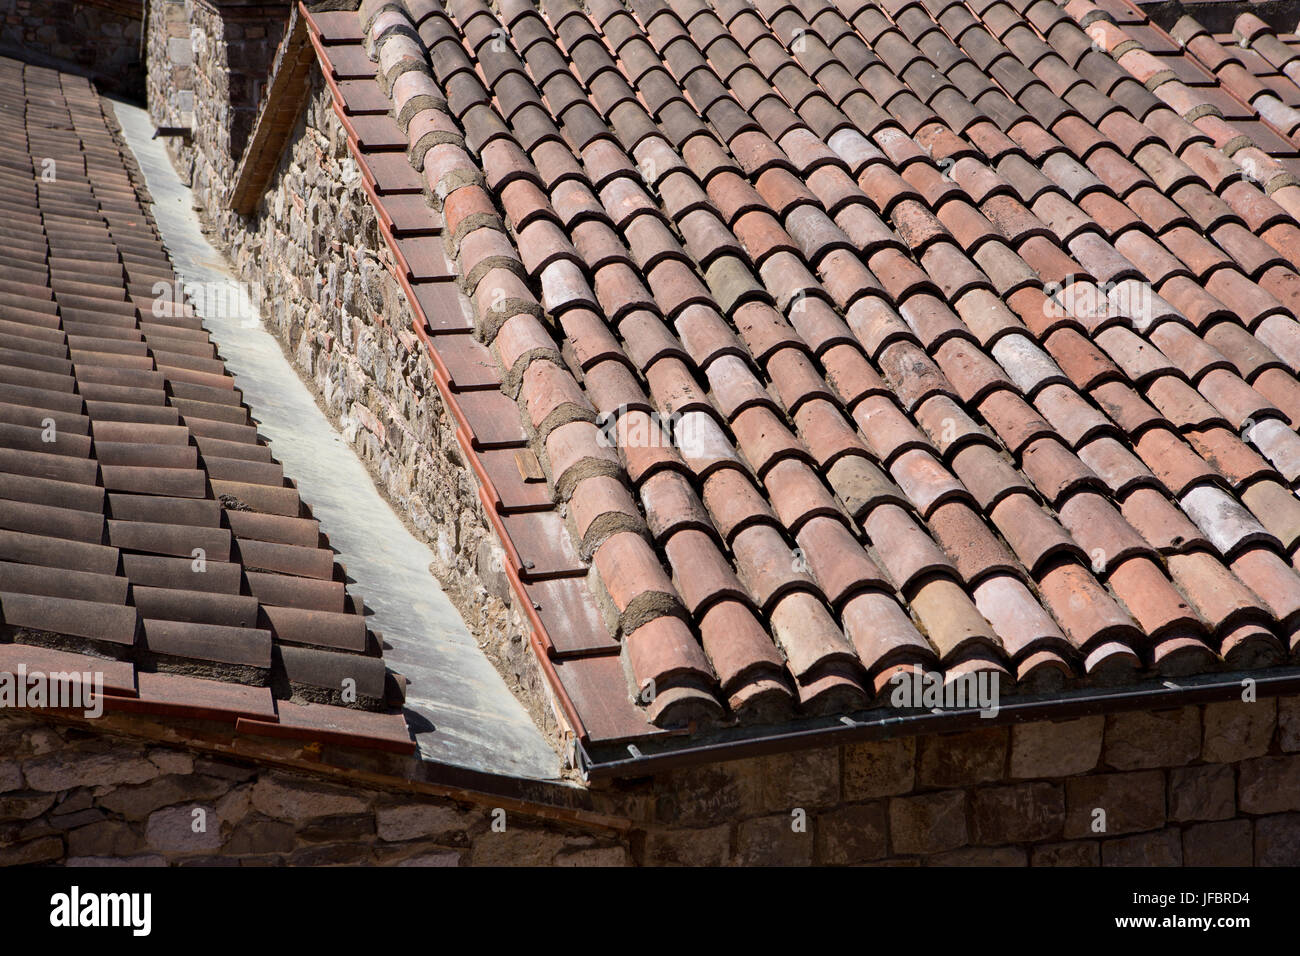 The roof details and architecture of Castello di Amorosa, a winery in Napa Valley designed as a castle. Stock Photo